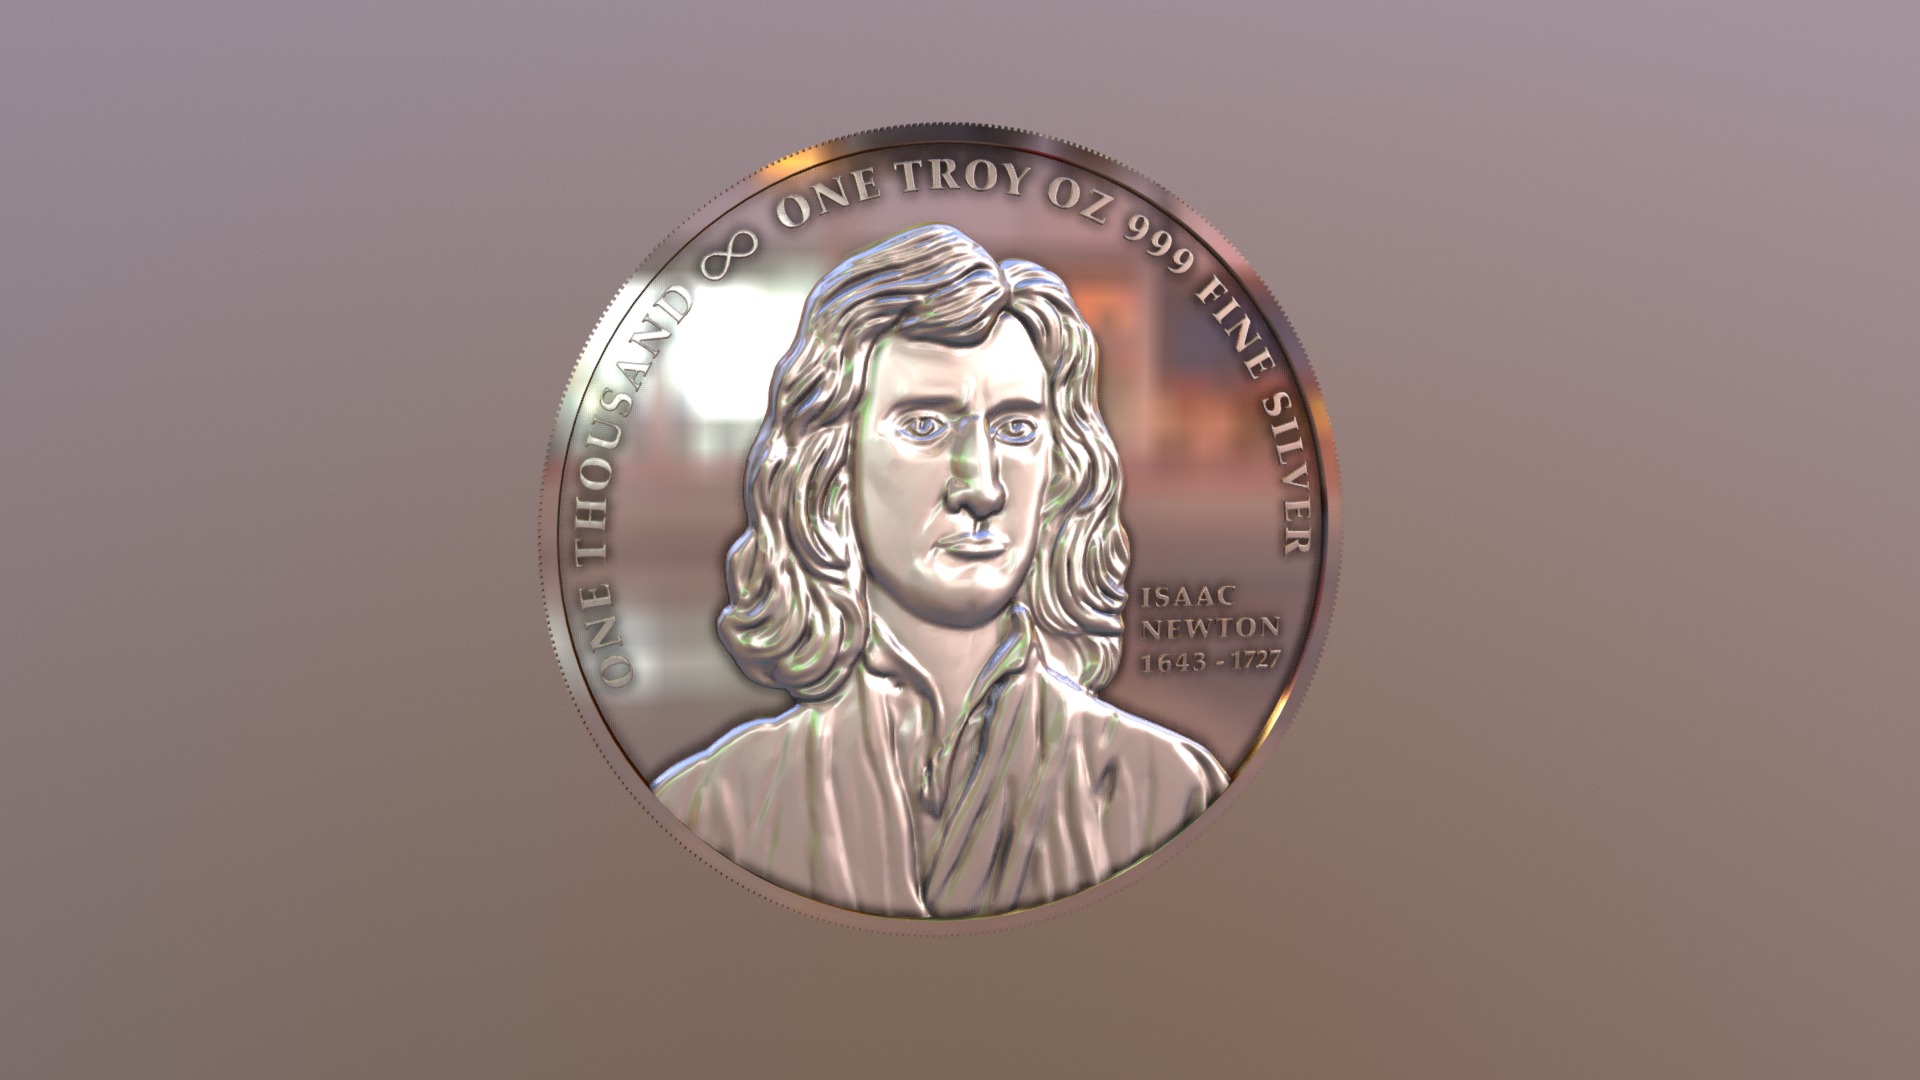 3D model Newton Bittcoin - This is a 3D model of the Newton Bittcoin. The 3D model is about a coin with a face on it.